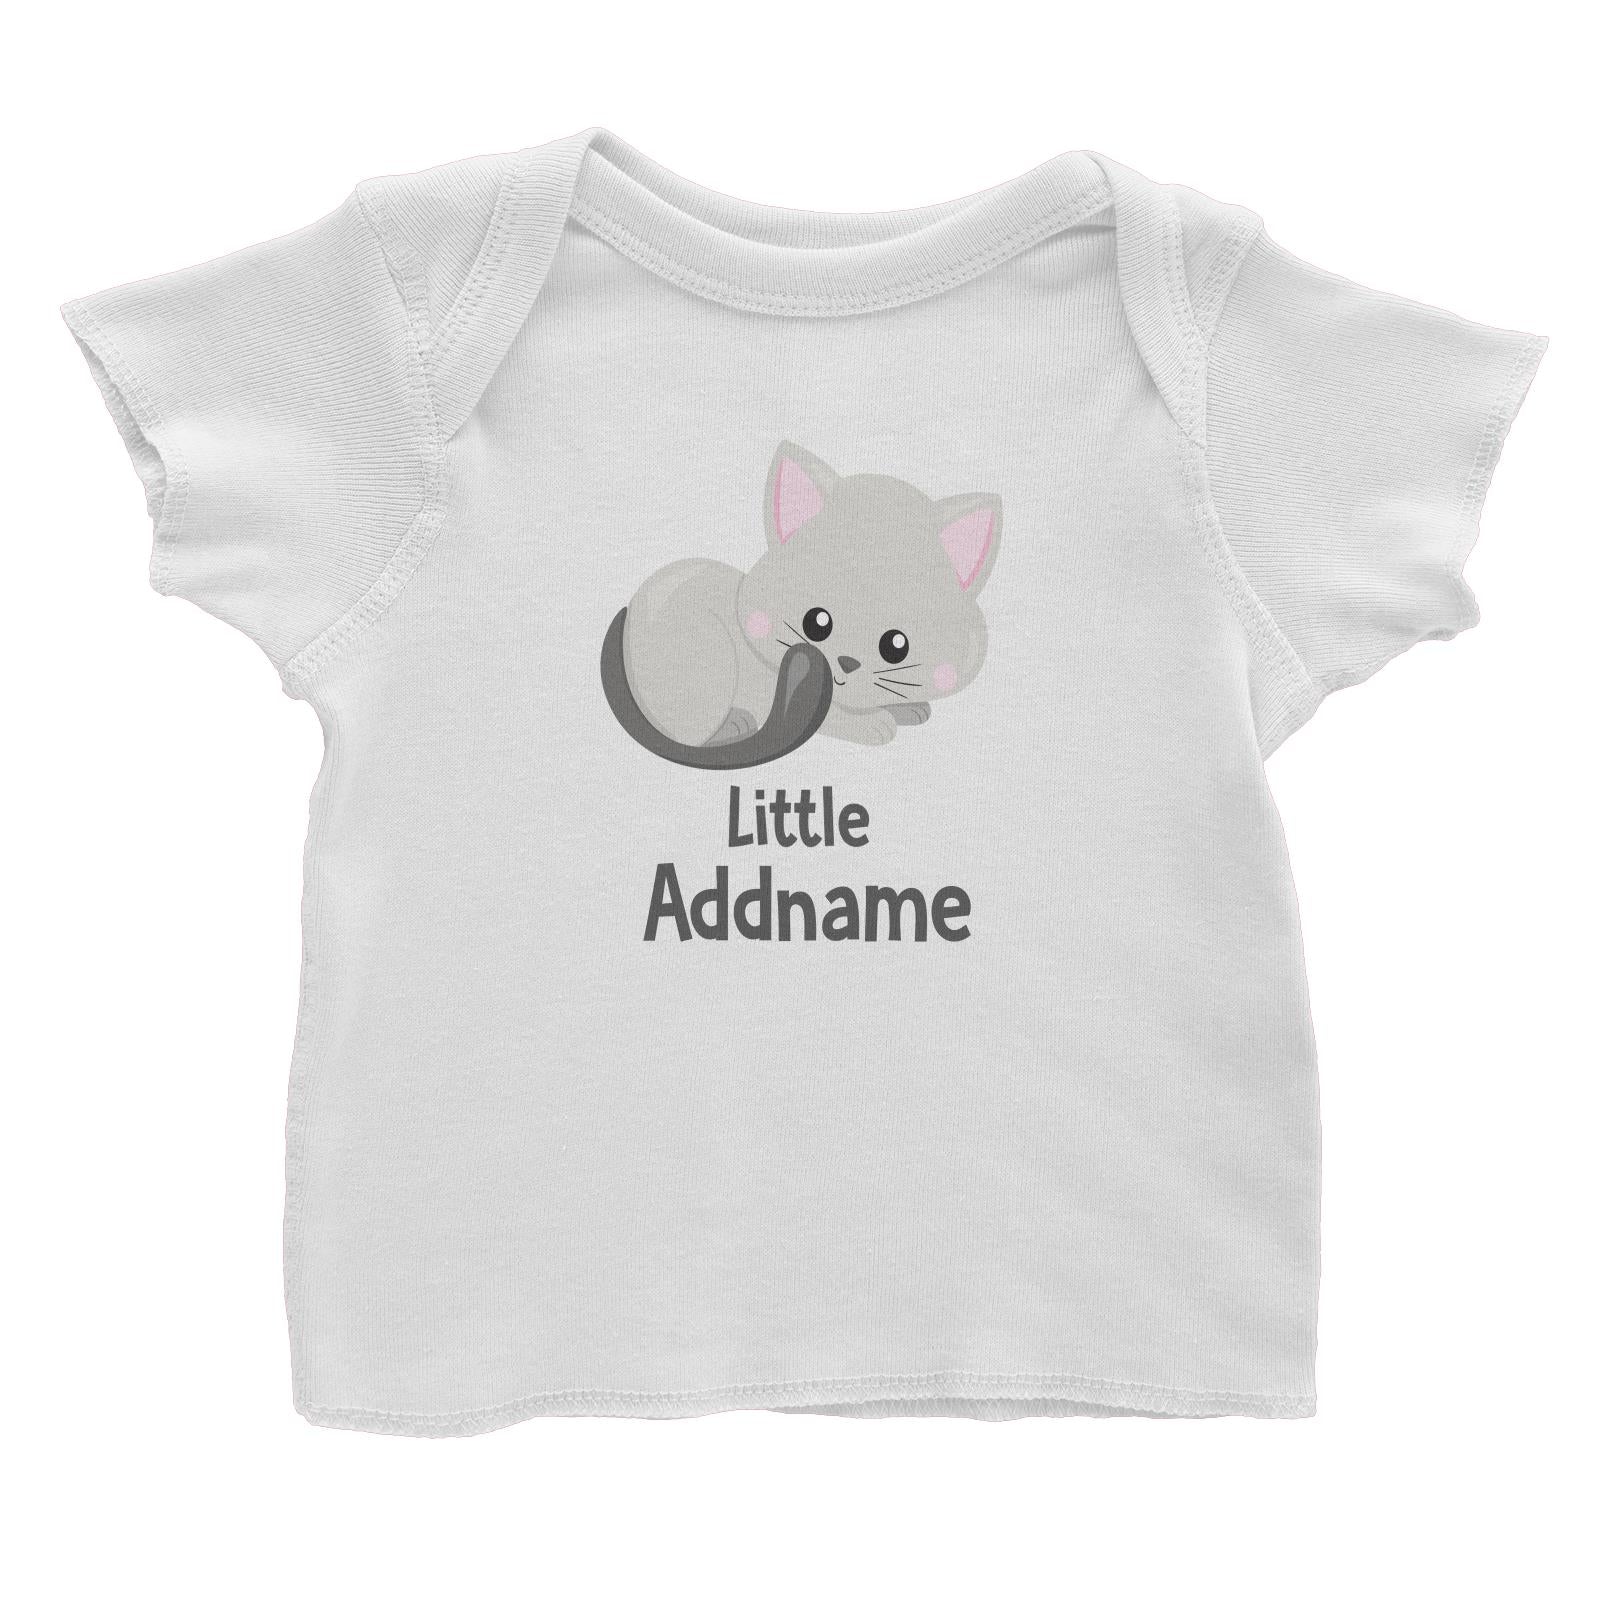 Adorable Cats Grey Cat Little Addname Baby T-Shirt